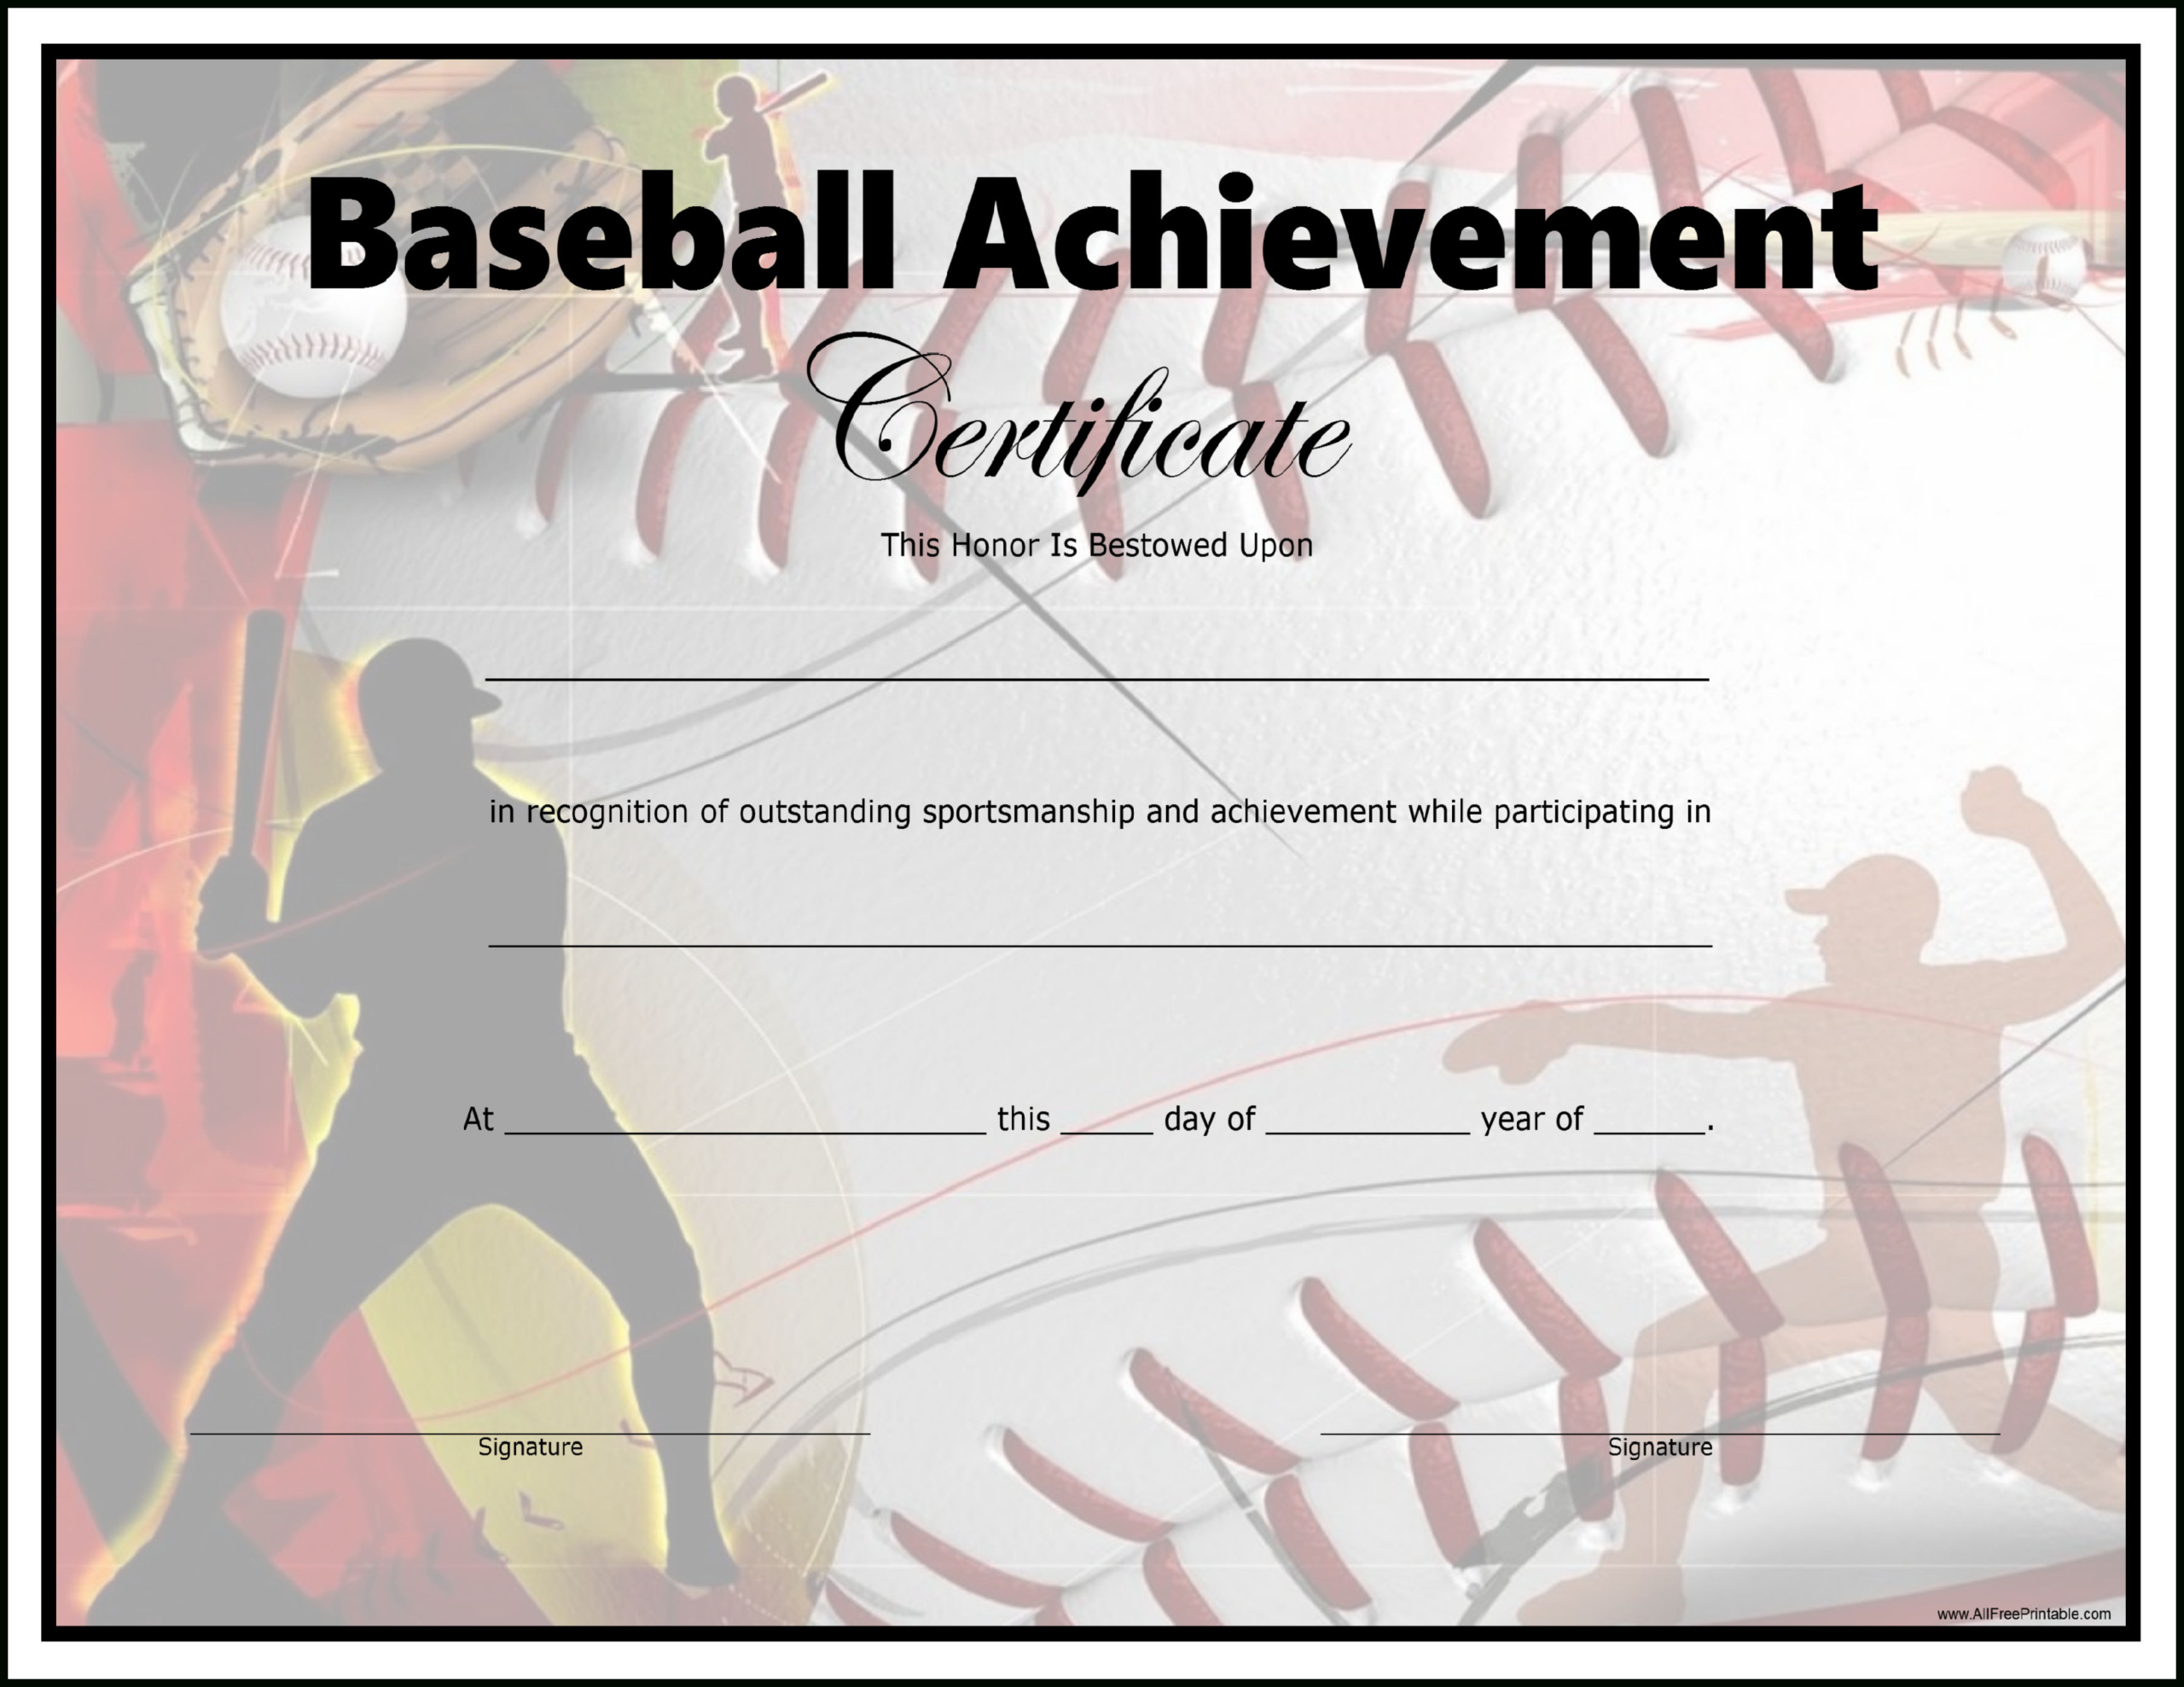 Baseball Achievement Certificate - Are You Into Sports And Looking within Baseball Award Certificate Template